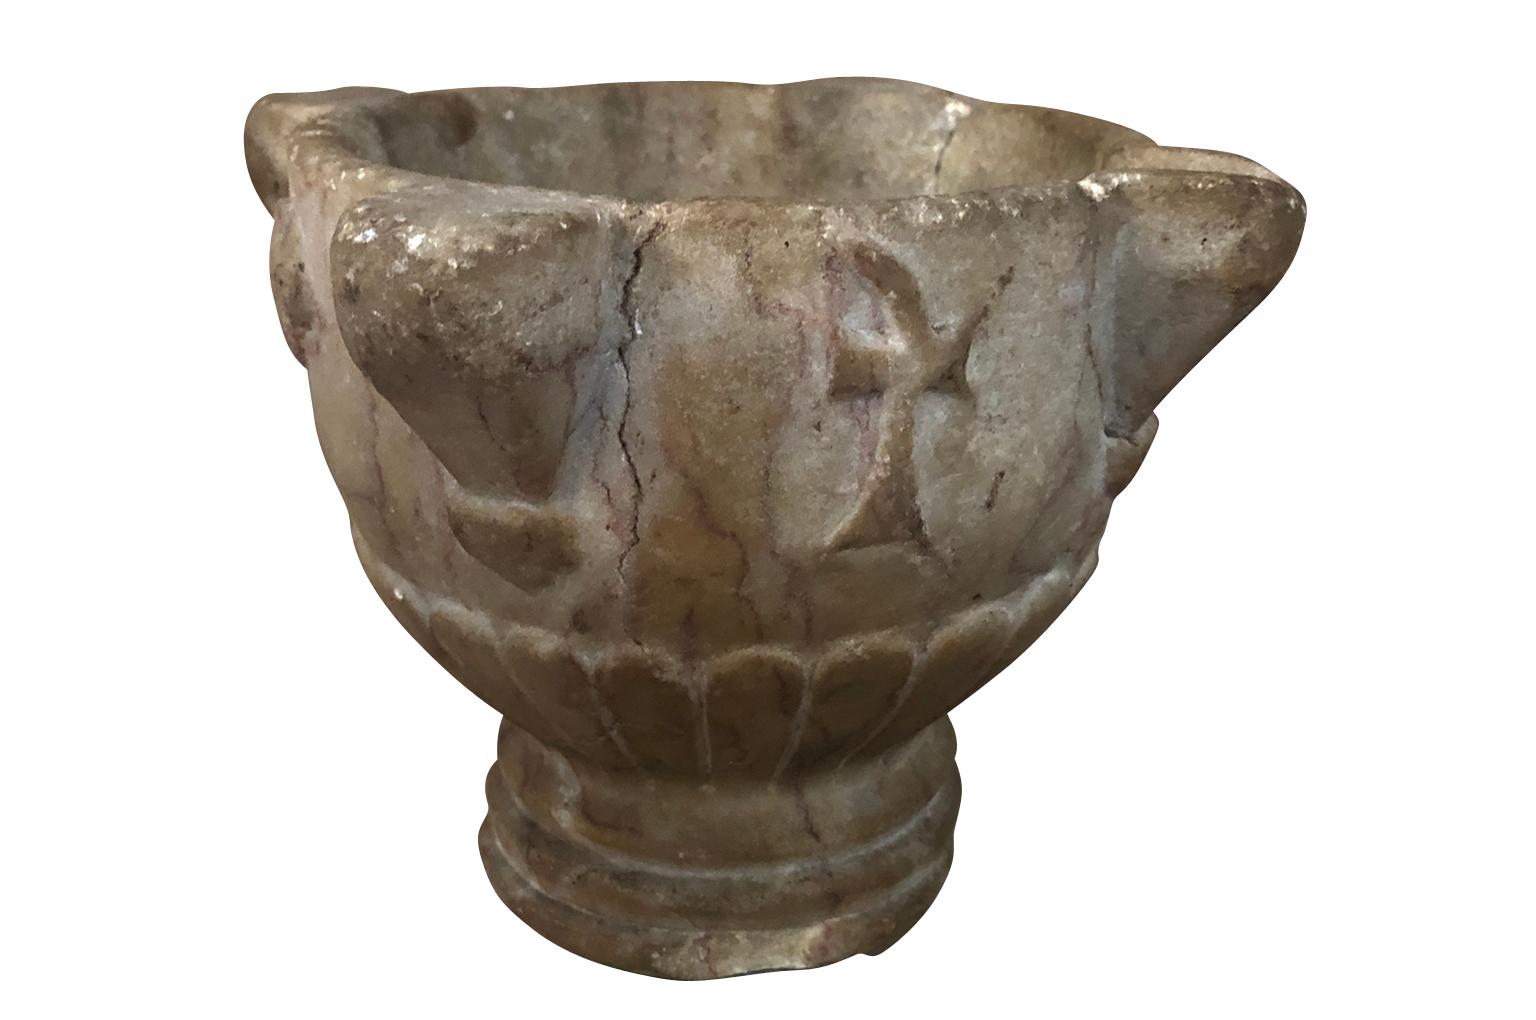 A very lovely 17th century mortar carved from marble from Tarragona, Spain. Excellent patina. A wonderful object for any tabletop of bookcase display.